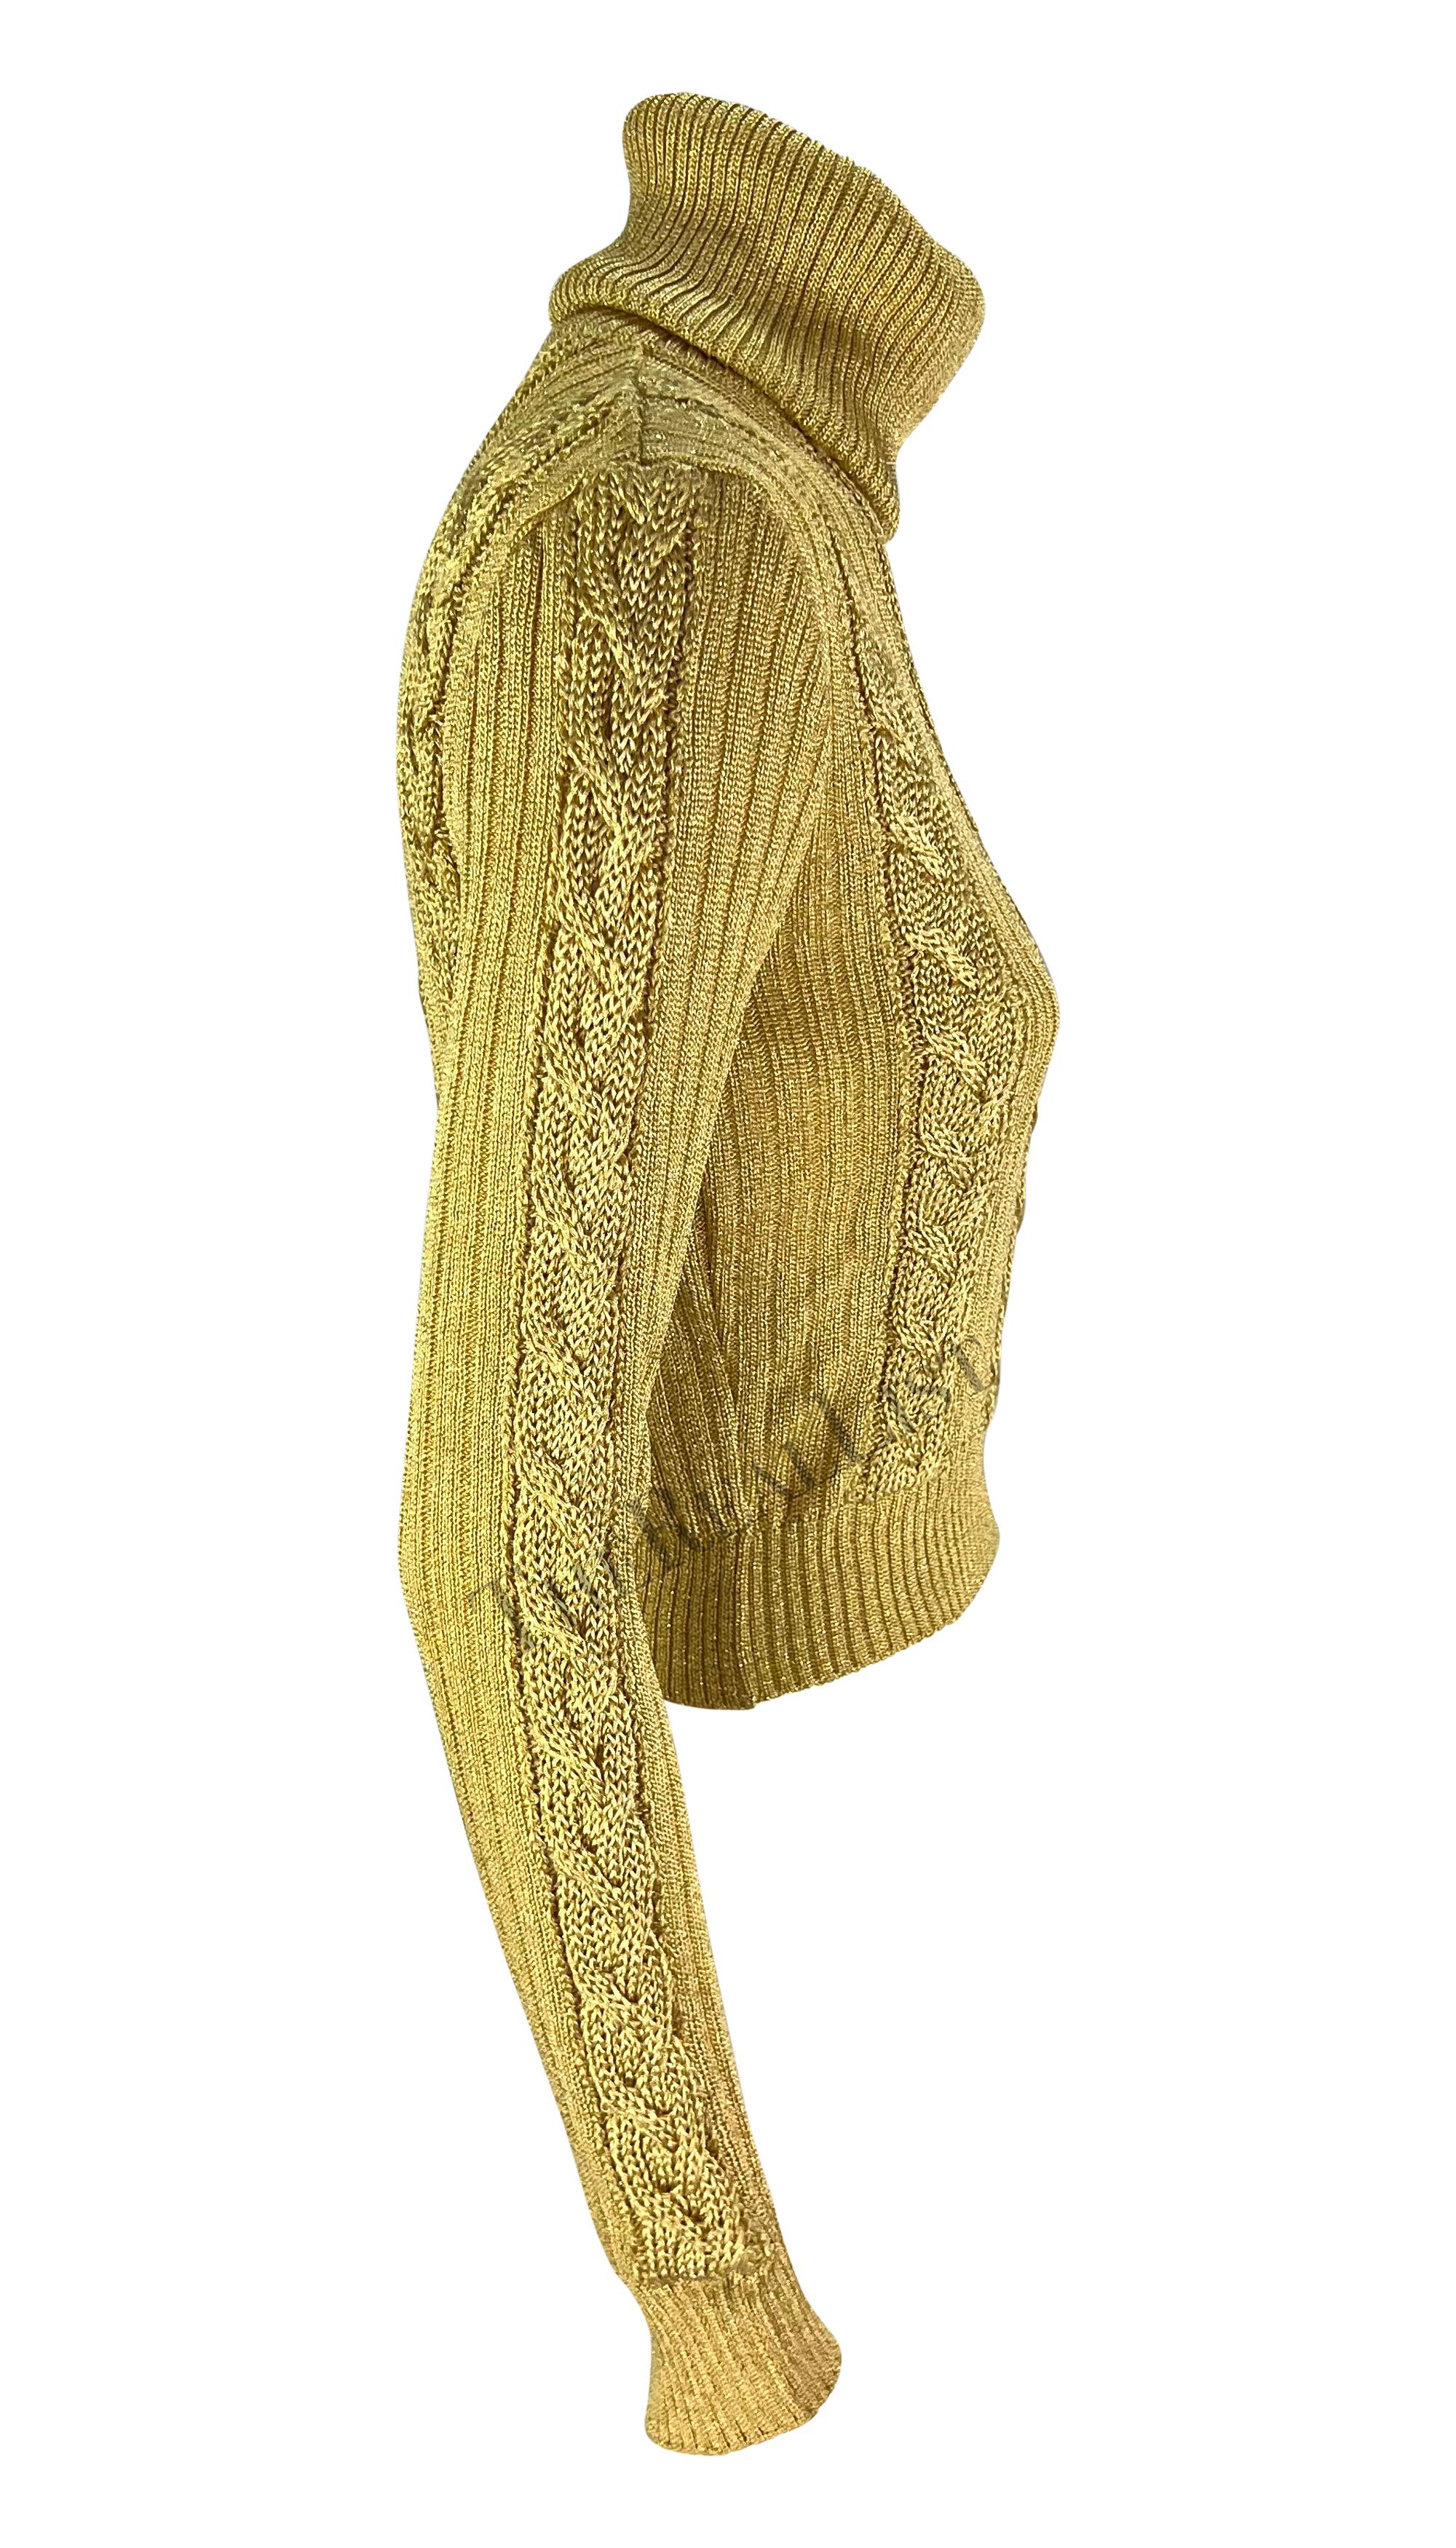 F/W 1994 Gianni Versace Ad Runway Gold Metallic Cable Knit Turtleneck Sweater For Sale 4